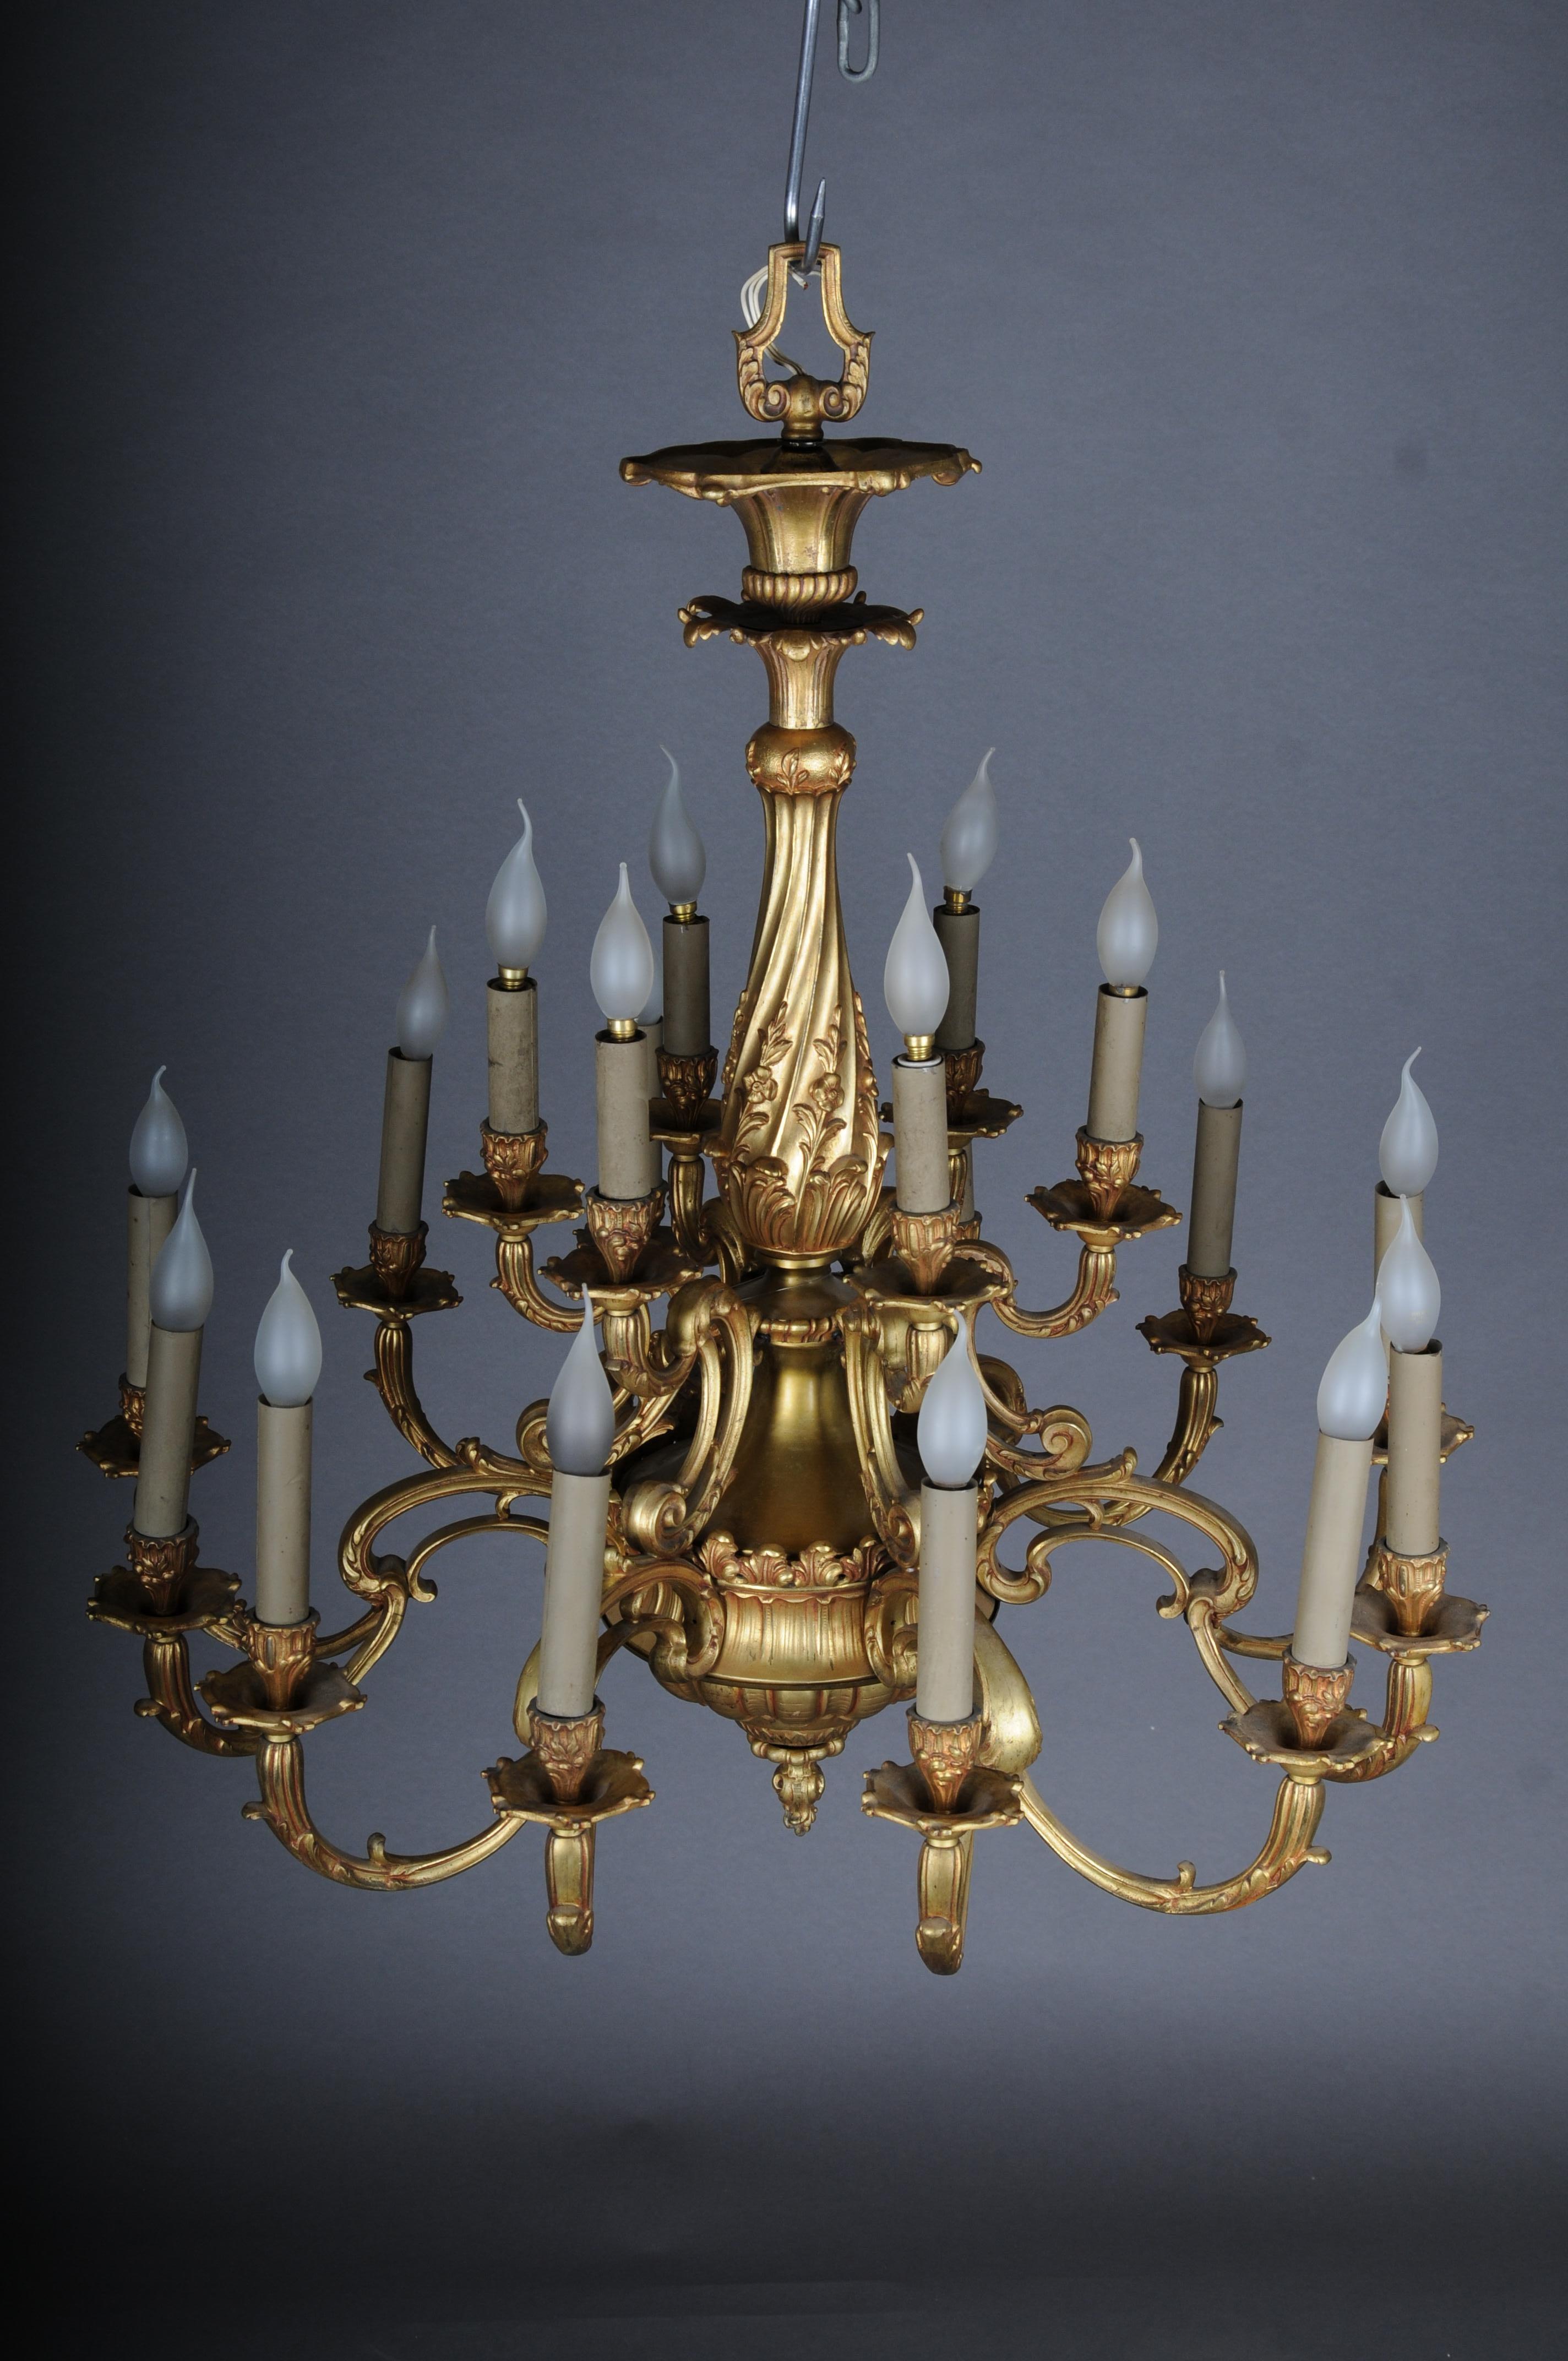 19th century Ceiling Chandelier, France around 1890, gold bronze

Antique magnificent chandelier, voluminous body with curved light arms. 18 light arms. Electrified and ready for operation.